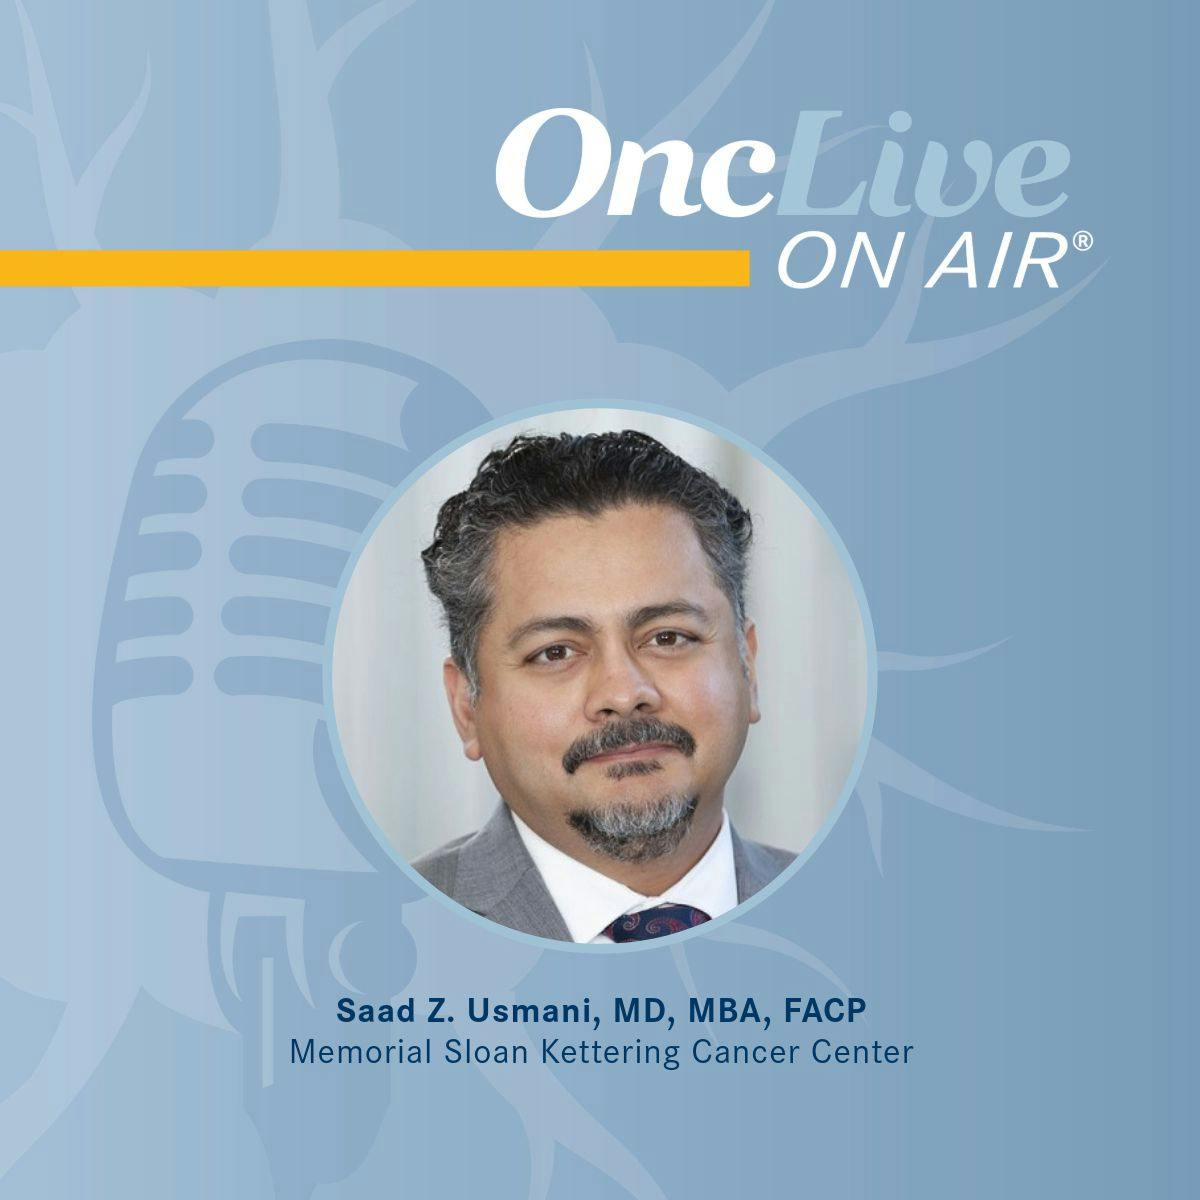 Saad Z. Usmani, MD, MBA, FACP, FASCO, hematologist-oncologist, chief, Myeloma Service, Memorial Sloan Kettering Cancer Center